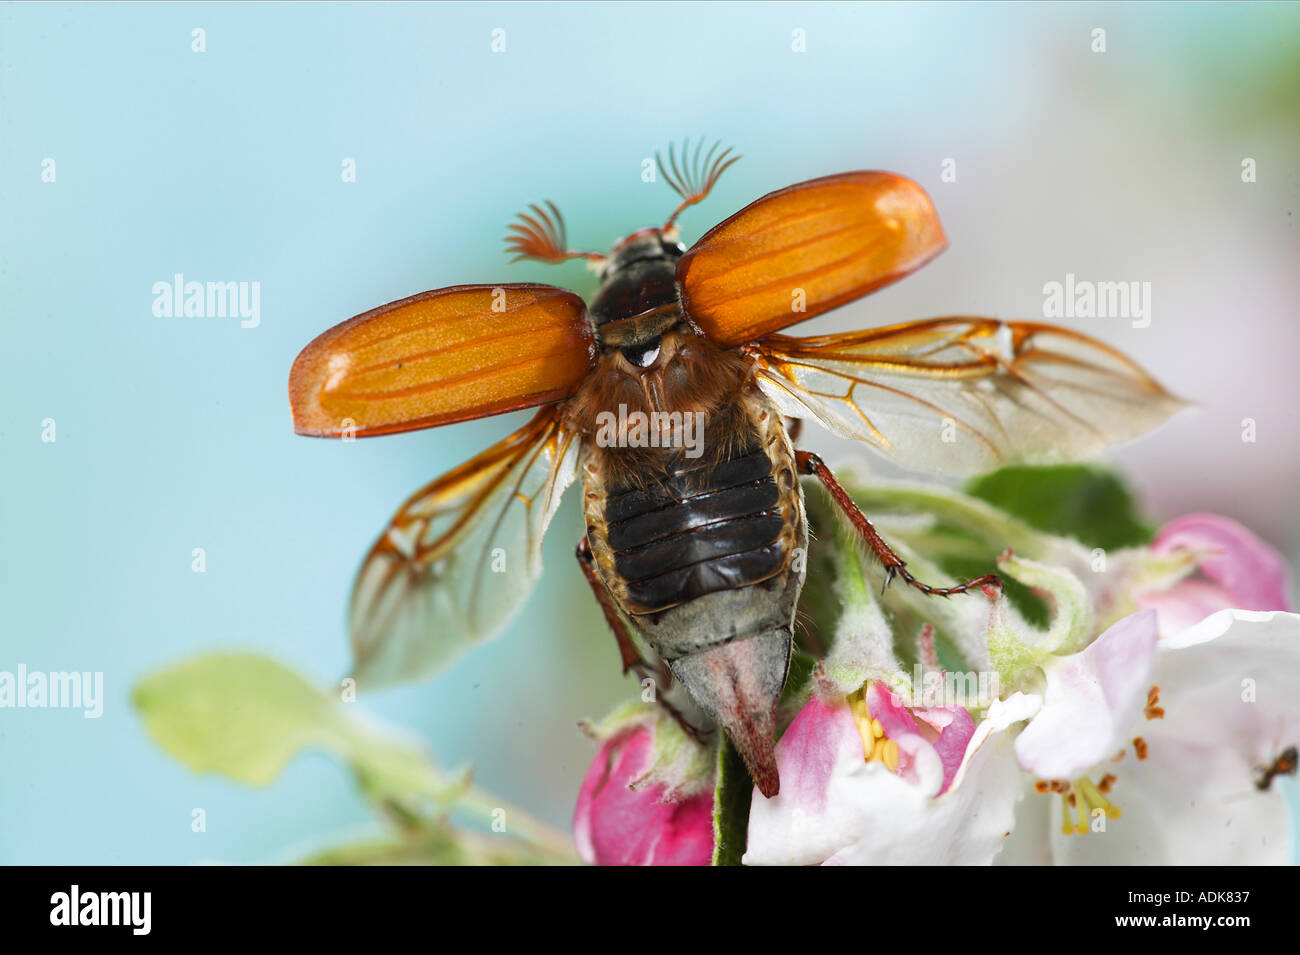 Common Cockchafer, Maybug (Melolontha melolontha). Adult taking off from apple blossoms. Germany Stock Photo